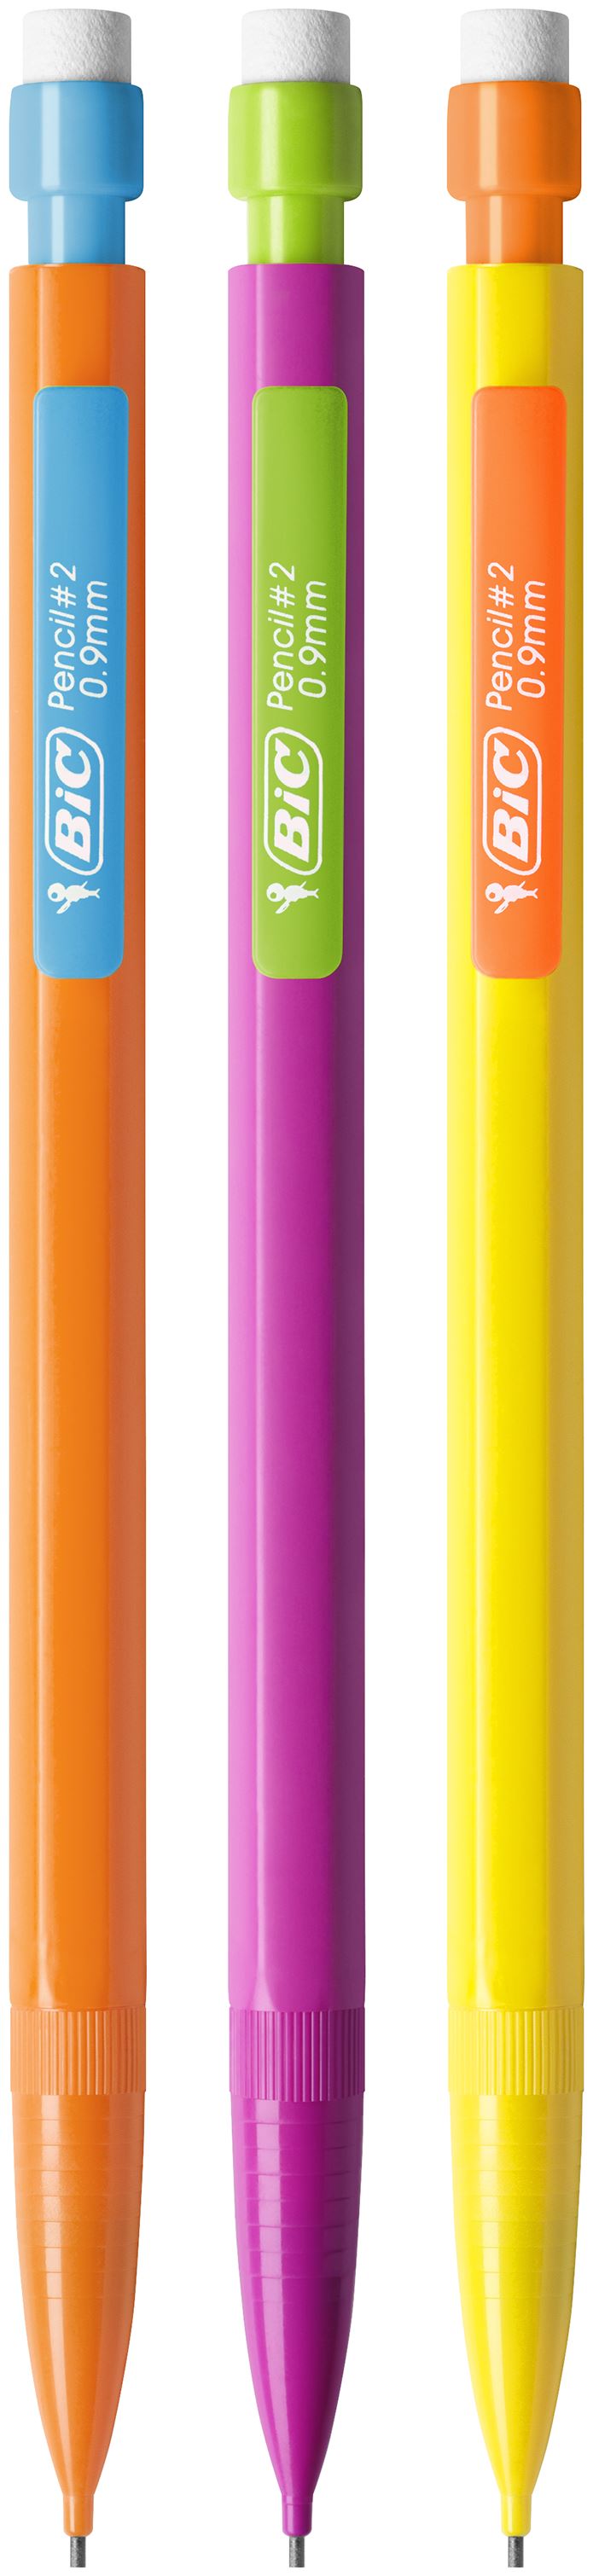 Bic Matic Strong Mechanical Pencil HB 0.9mm Lead Assorted Colour Barrel (Pack 12) - 892271 - ONE CLICK SUPPLIES